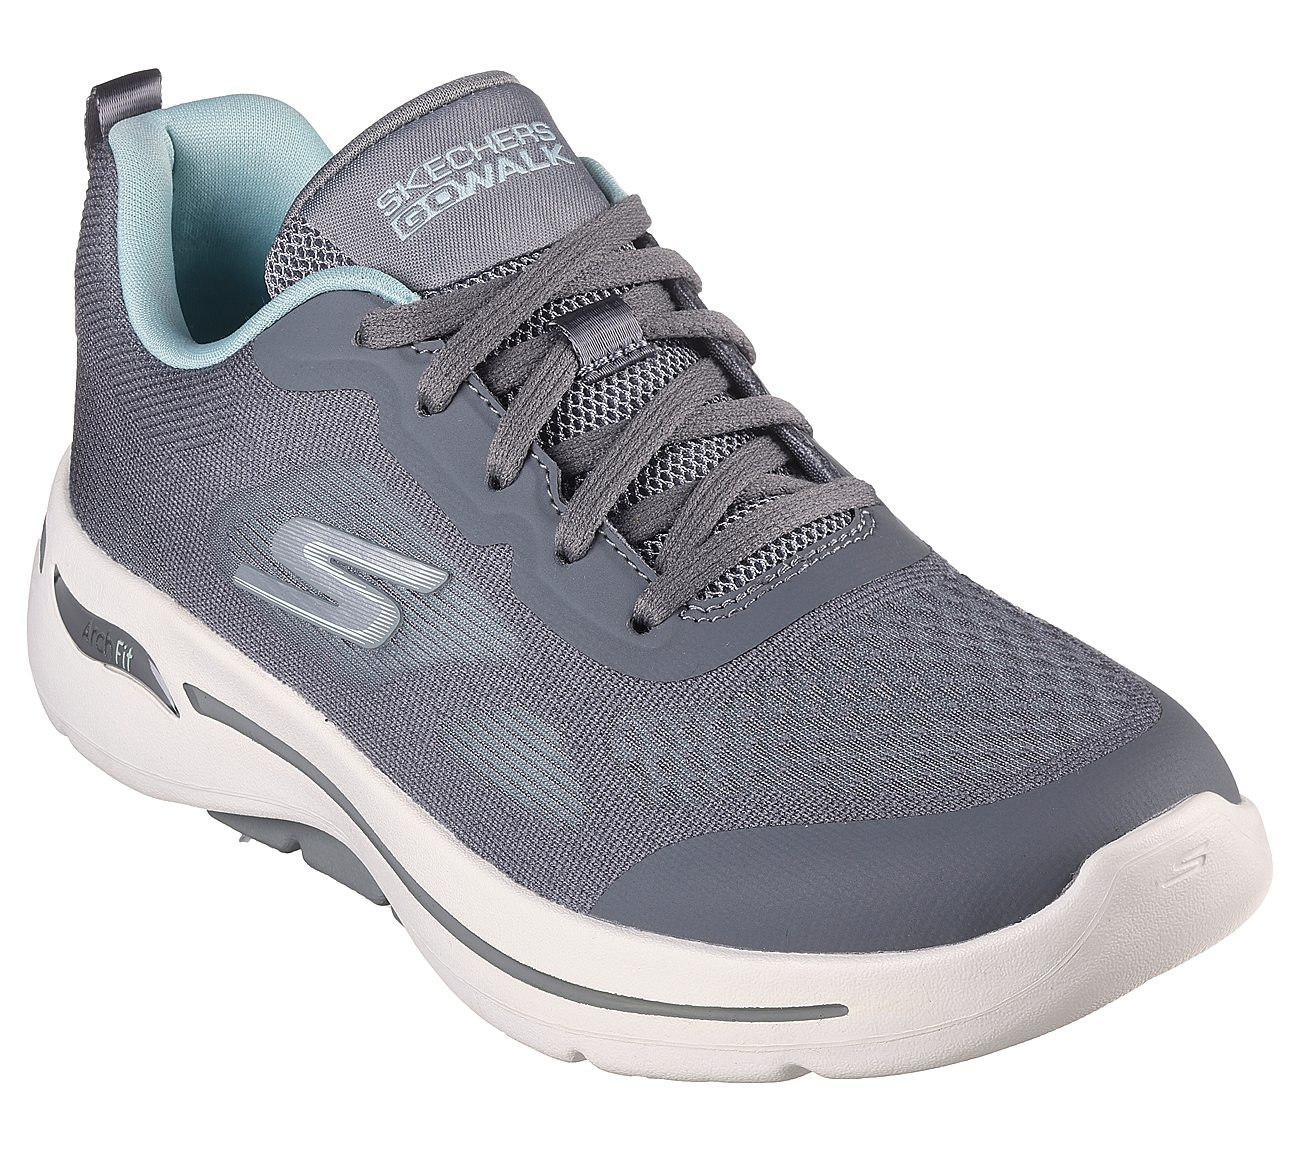 Skechers Grey/Aqua Go Walk Arch Fit F Womens Lace Up Shoes - Style ID ...